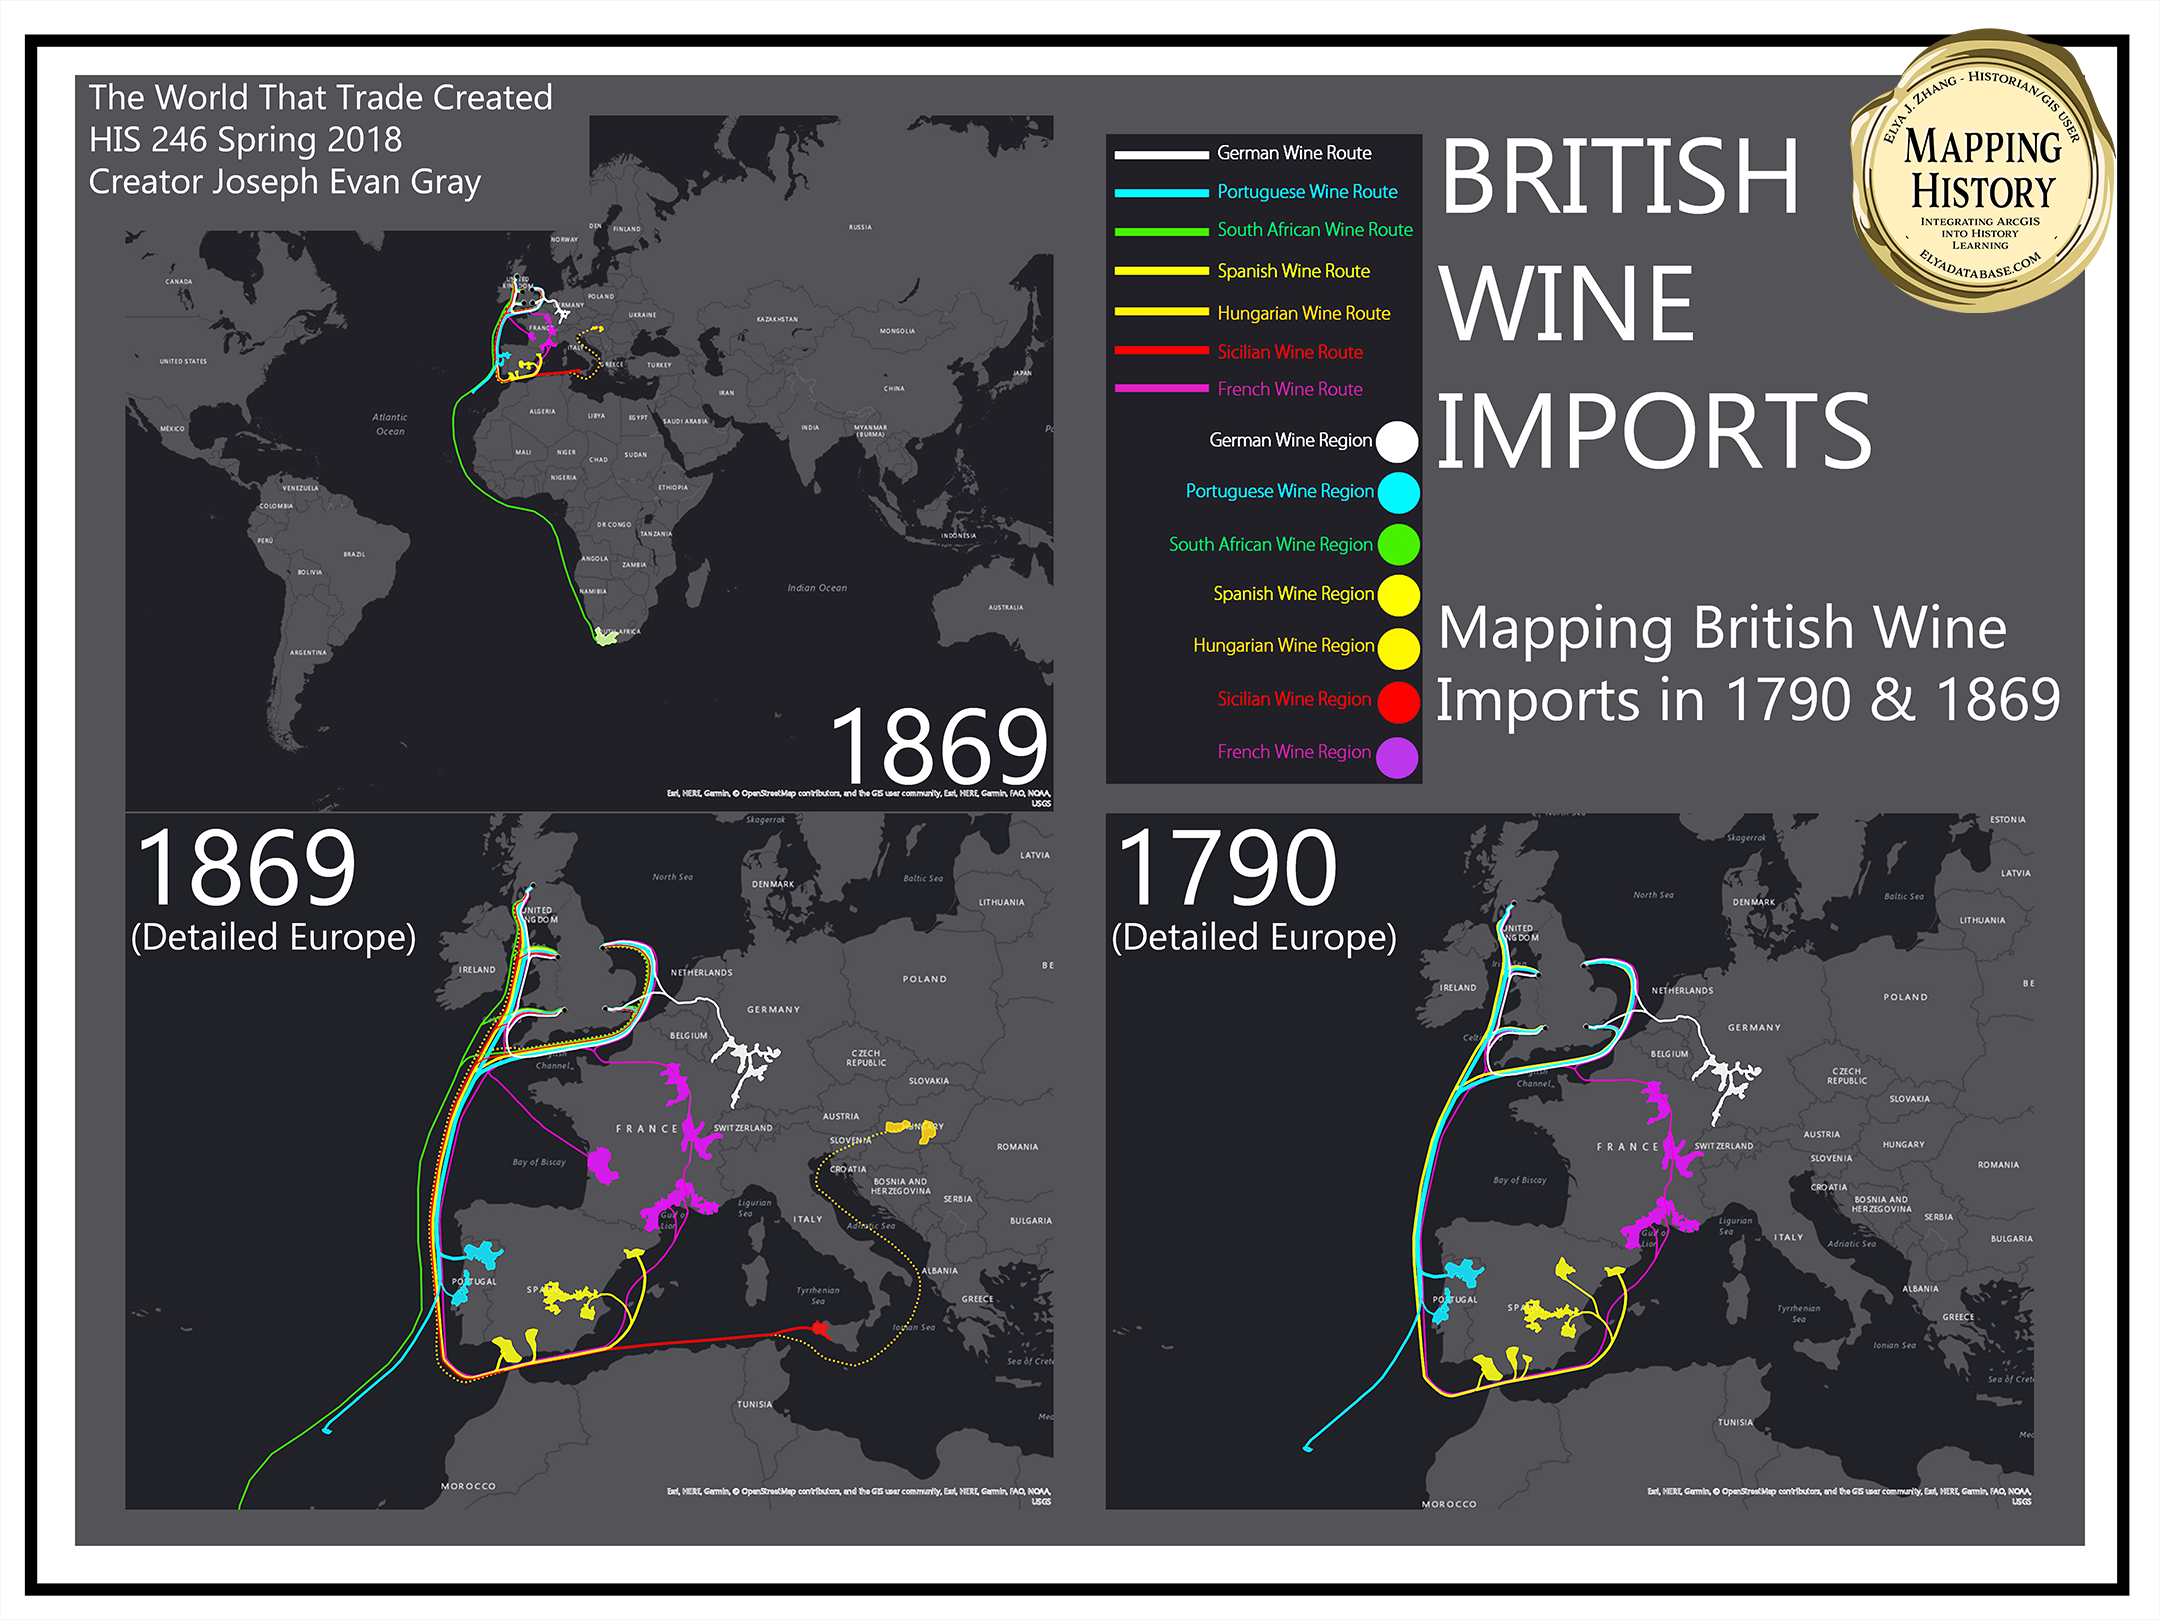 Mapping British Wine Imports in 1790 and 1869